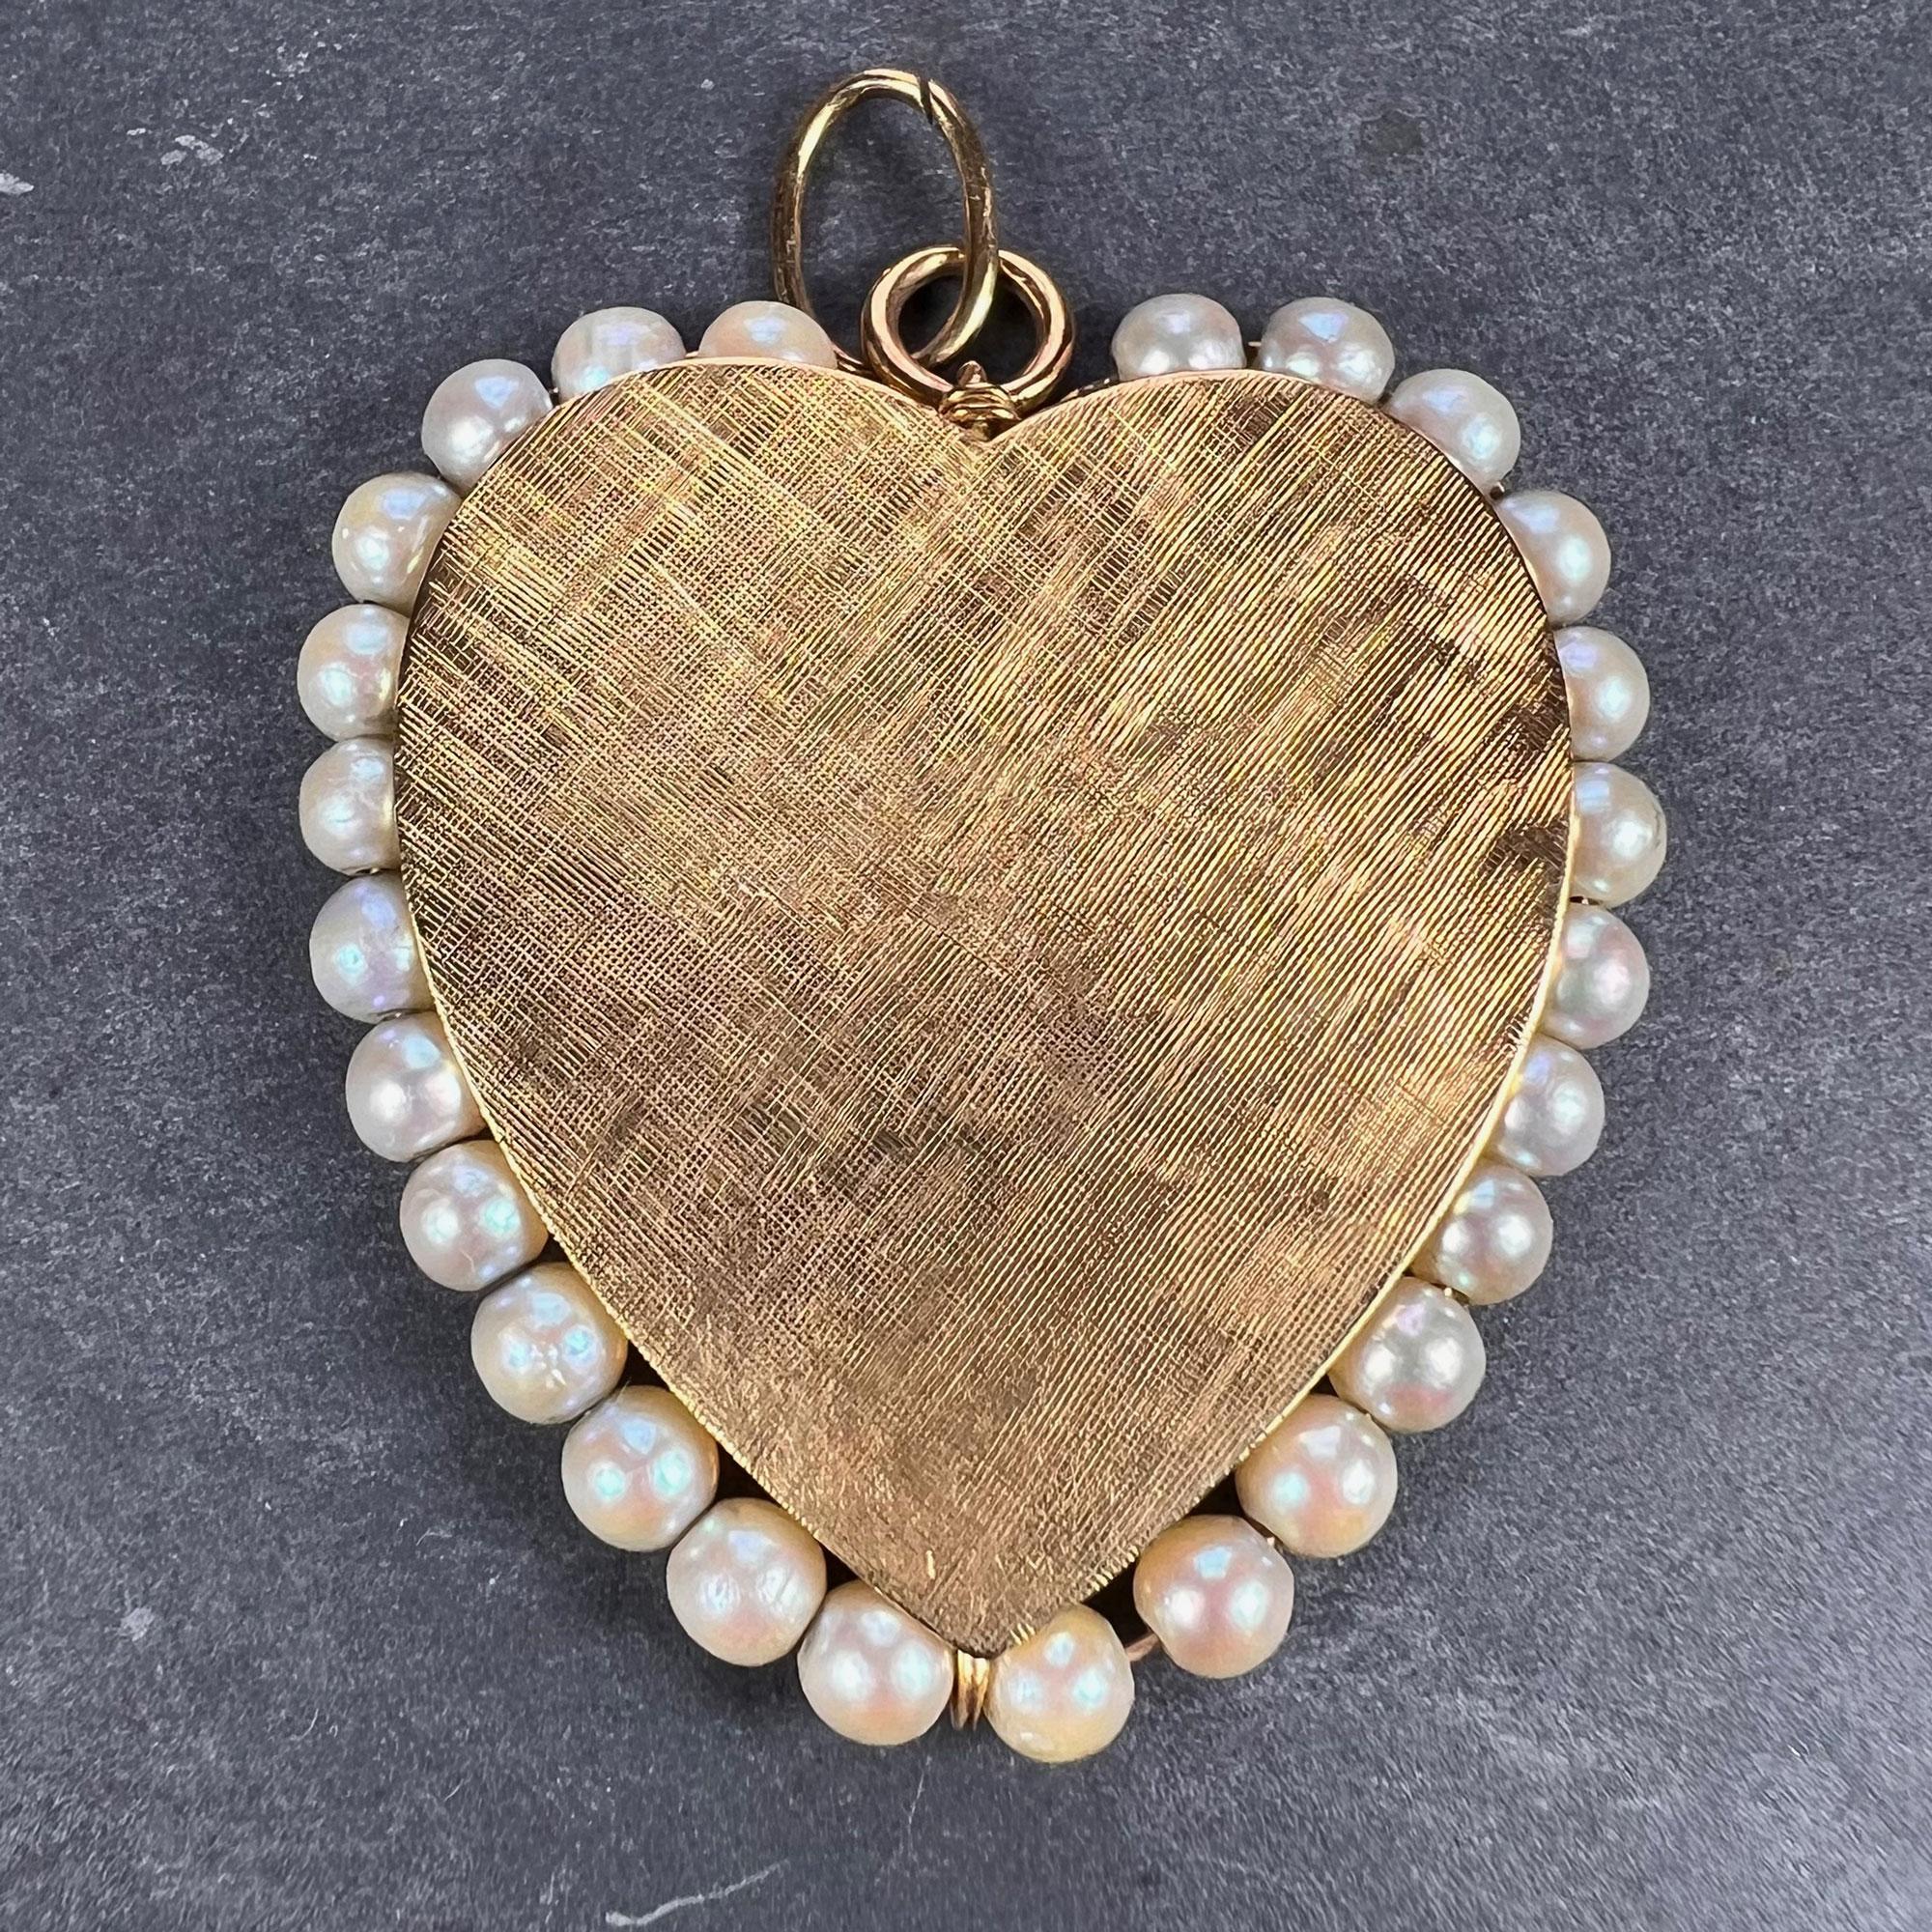 A 14 karat (14K) yellow gold charm pendant designed as a very large love heart, engraved with a cross-hatch pattern to one side, polished to the other. The heart is surrounded by 26 white cultured pearls with an average diameter of 4mm. Stamped 14K